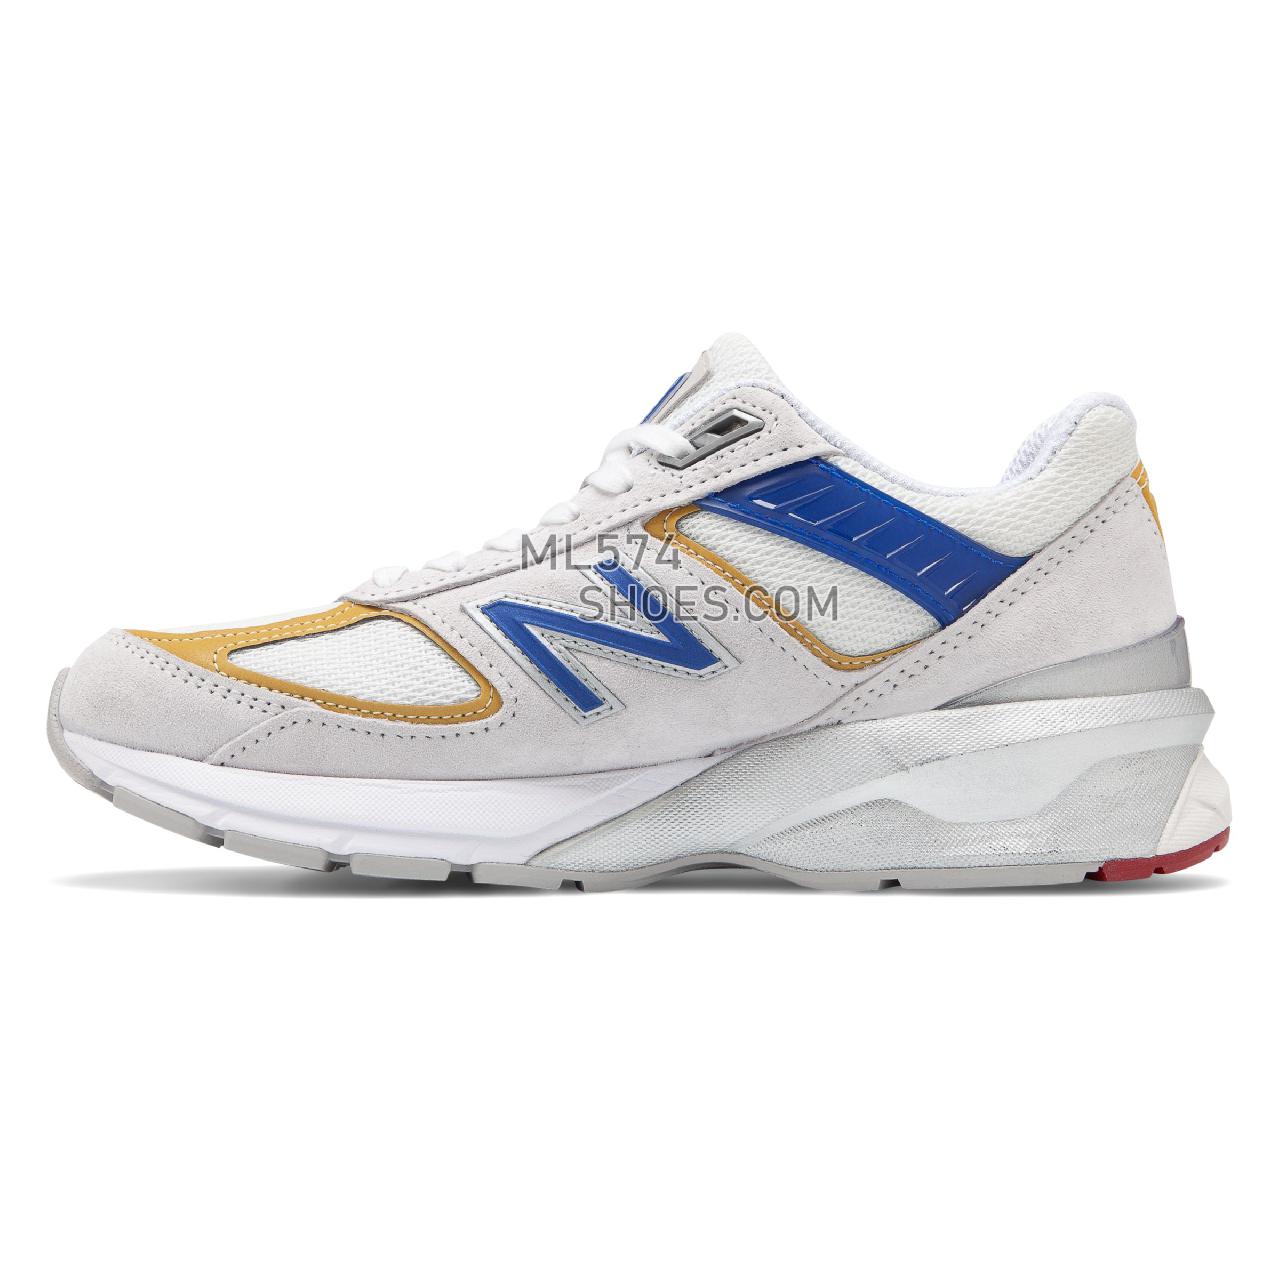 New Balance 990v5 Made in US - Women's Neutral Running - Nimbus Cloud with Team Red - W990NR5